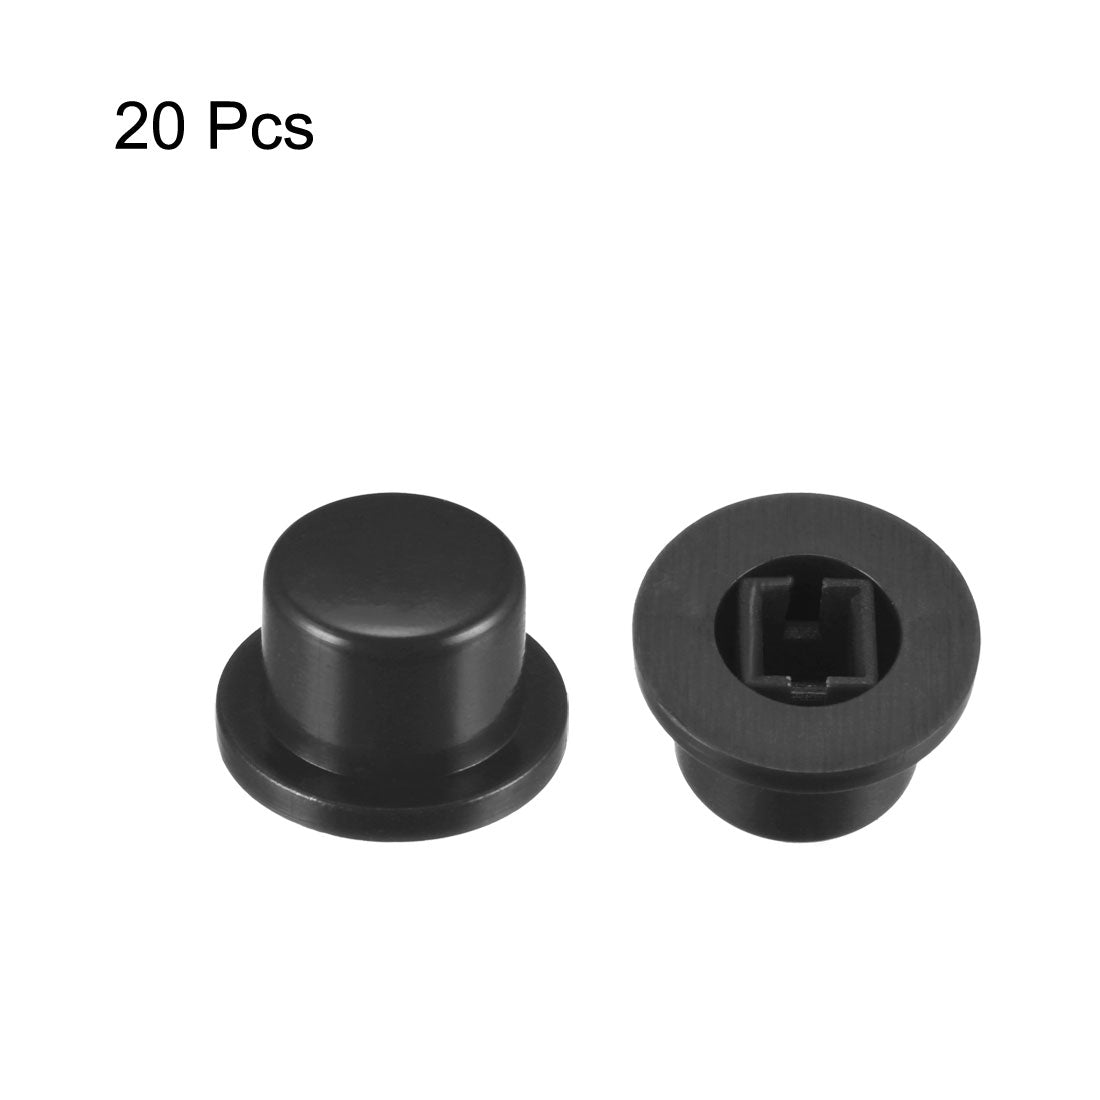 uxcell Uxcell 20Pcs Plastic 9.3x5.6mm Pushbutton Tactile Switch Caps Cover Keycaps Black for 6x6x7.3mm Tact Switch